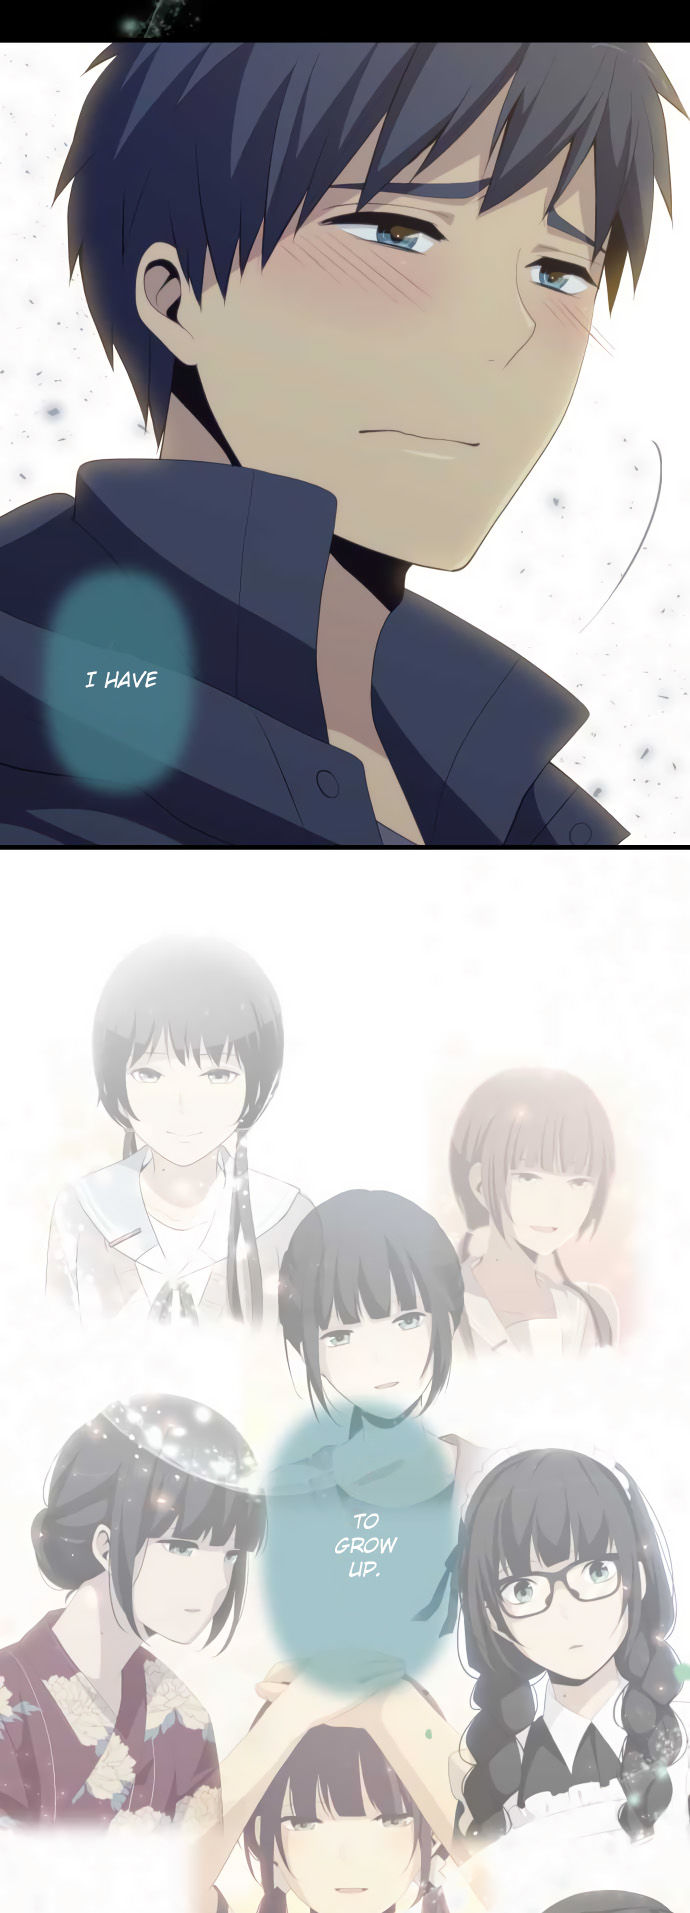 ReLIFE 197